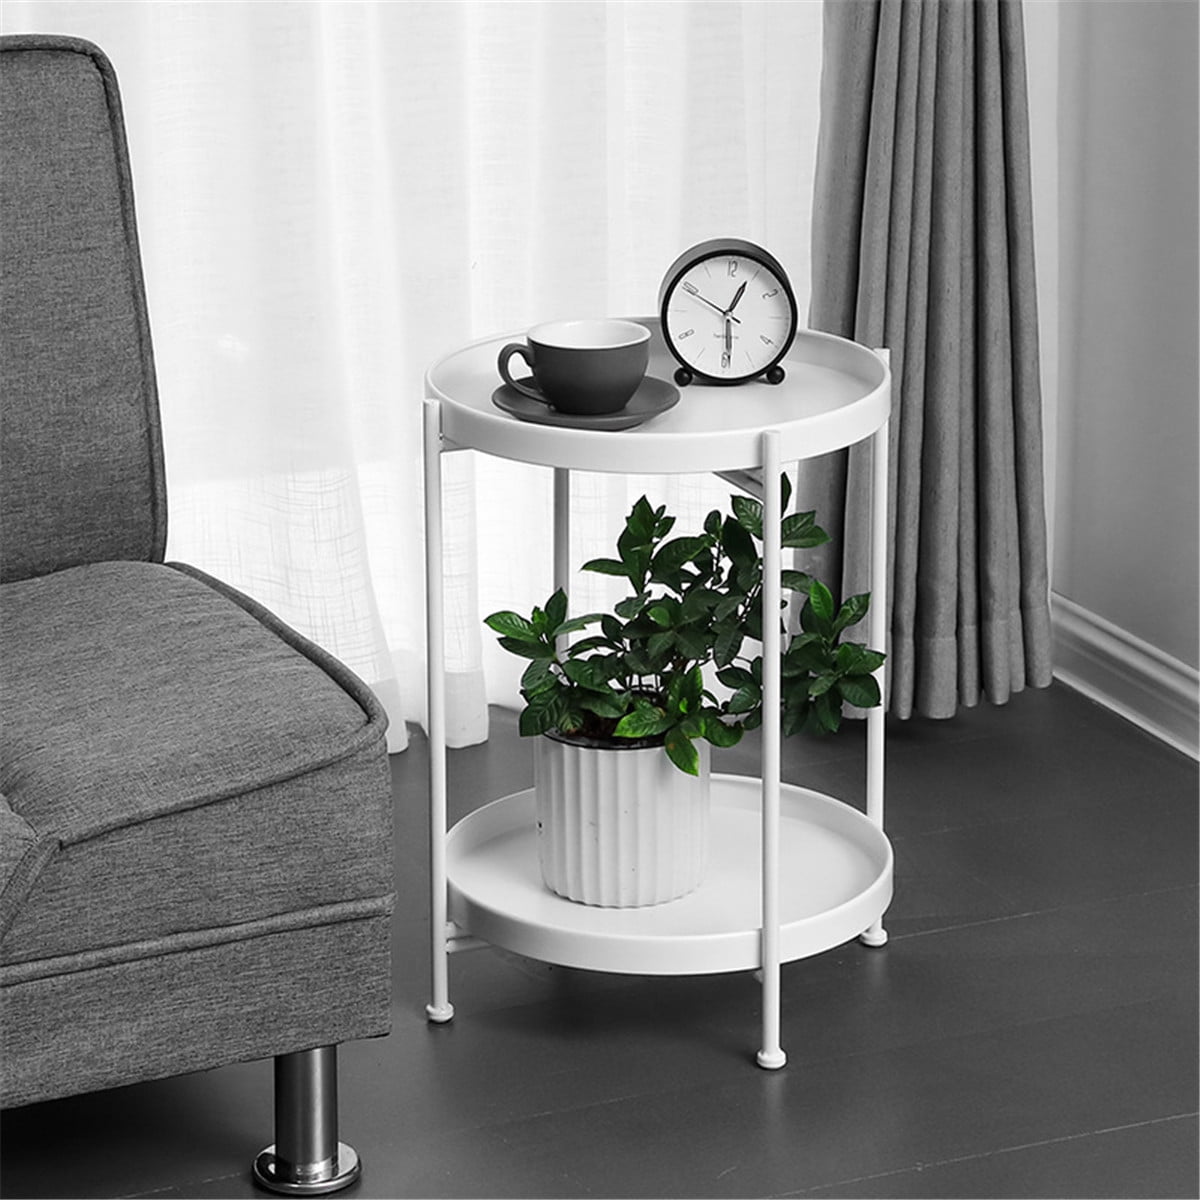 Coffee Table Nordic Style Side End Table Durable Metal Frame Furniture Small Space Tea Corner Table for Living Room Bedroom Patio Garden Black